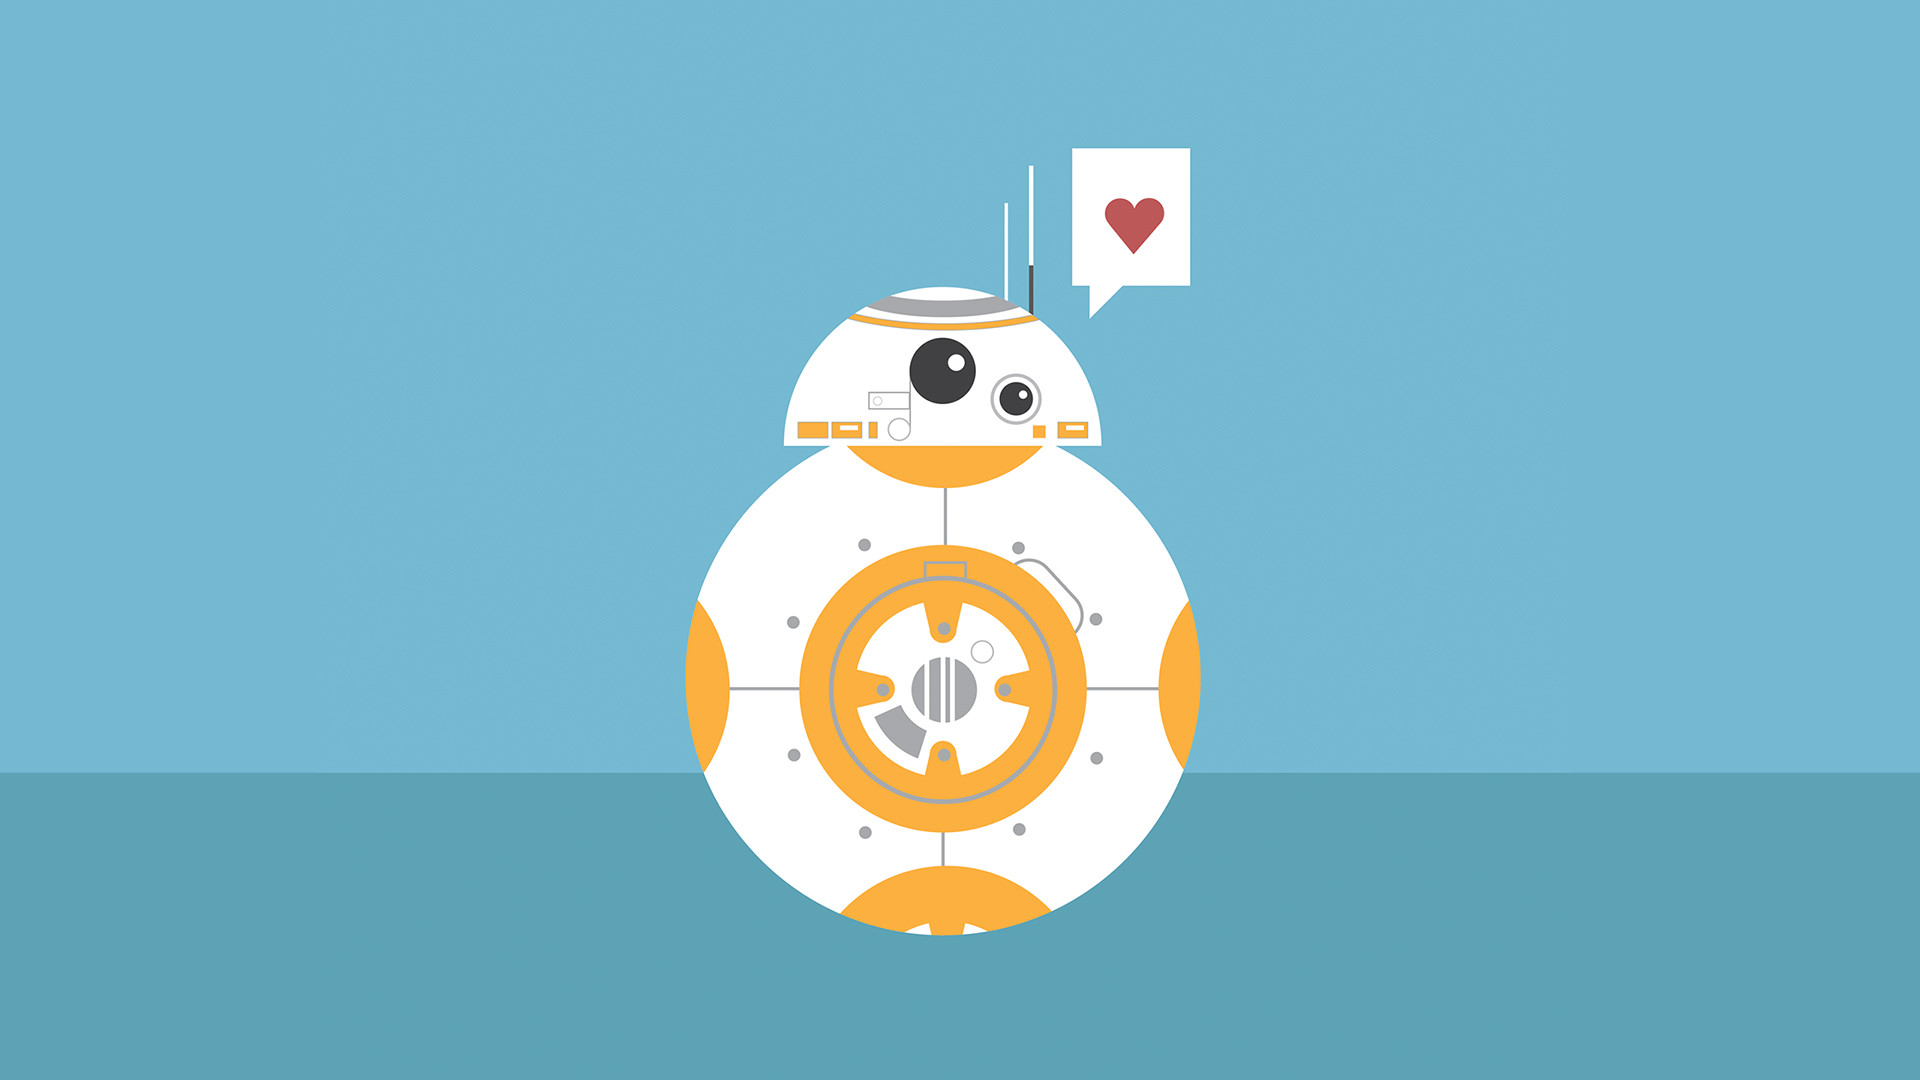 BB 8 by Virginia Poltrack